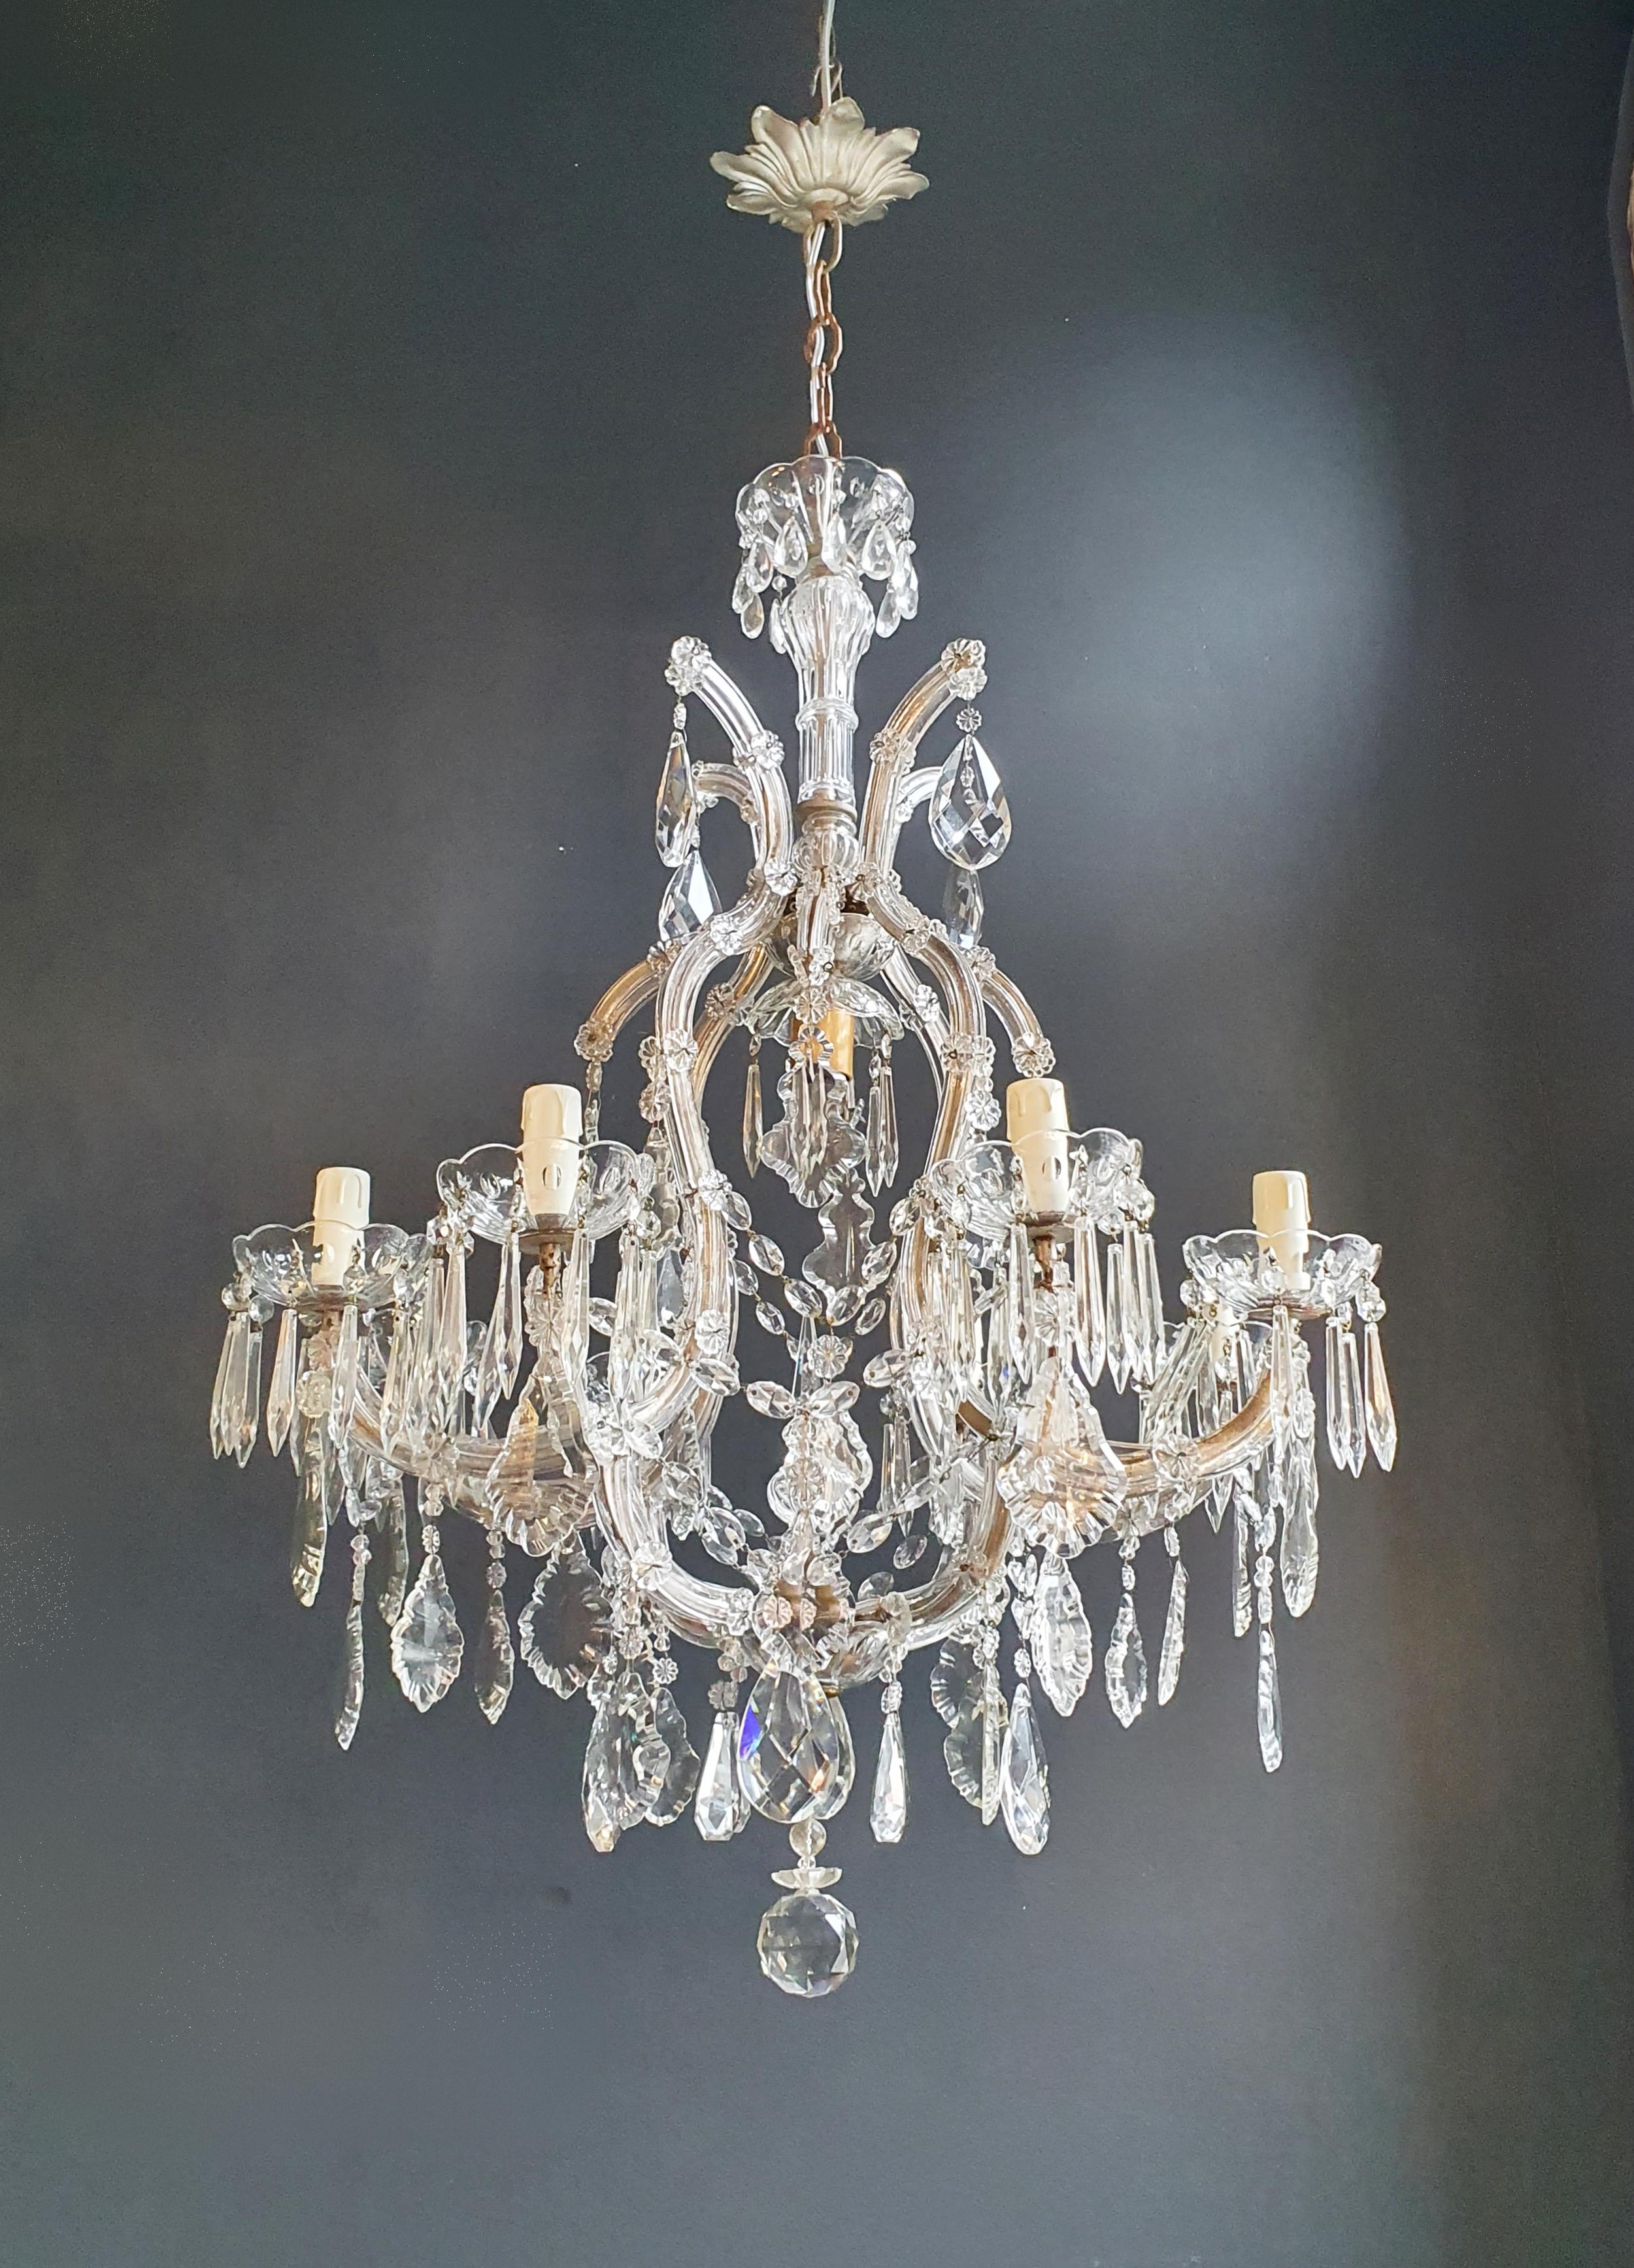 Lovingly Restored Antique Chandelier: A Gem from Berlin

Step into the realm of timeless elegance with this antique chandelier, meticulously restored in Berlin to seamlessly blend history and modernity. With a commitment to quality, this chandelier